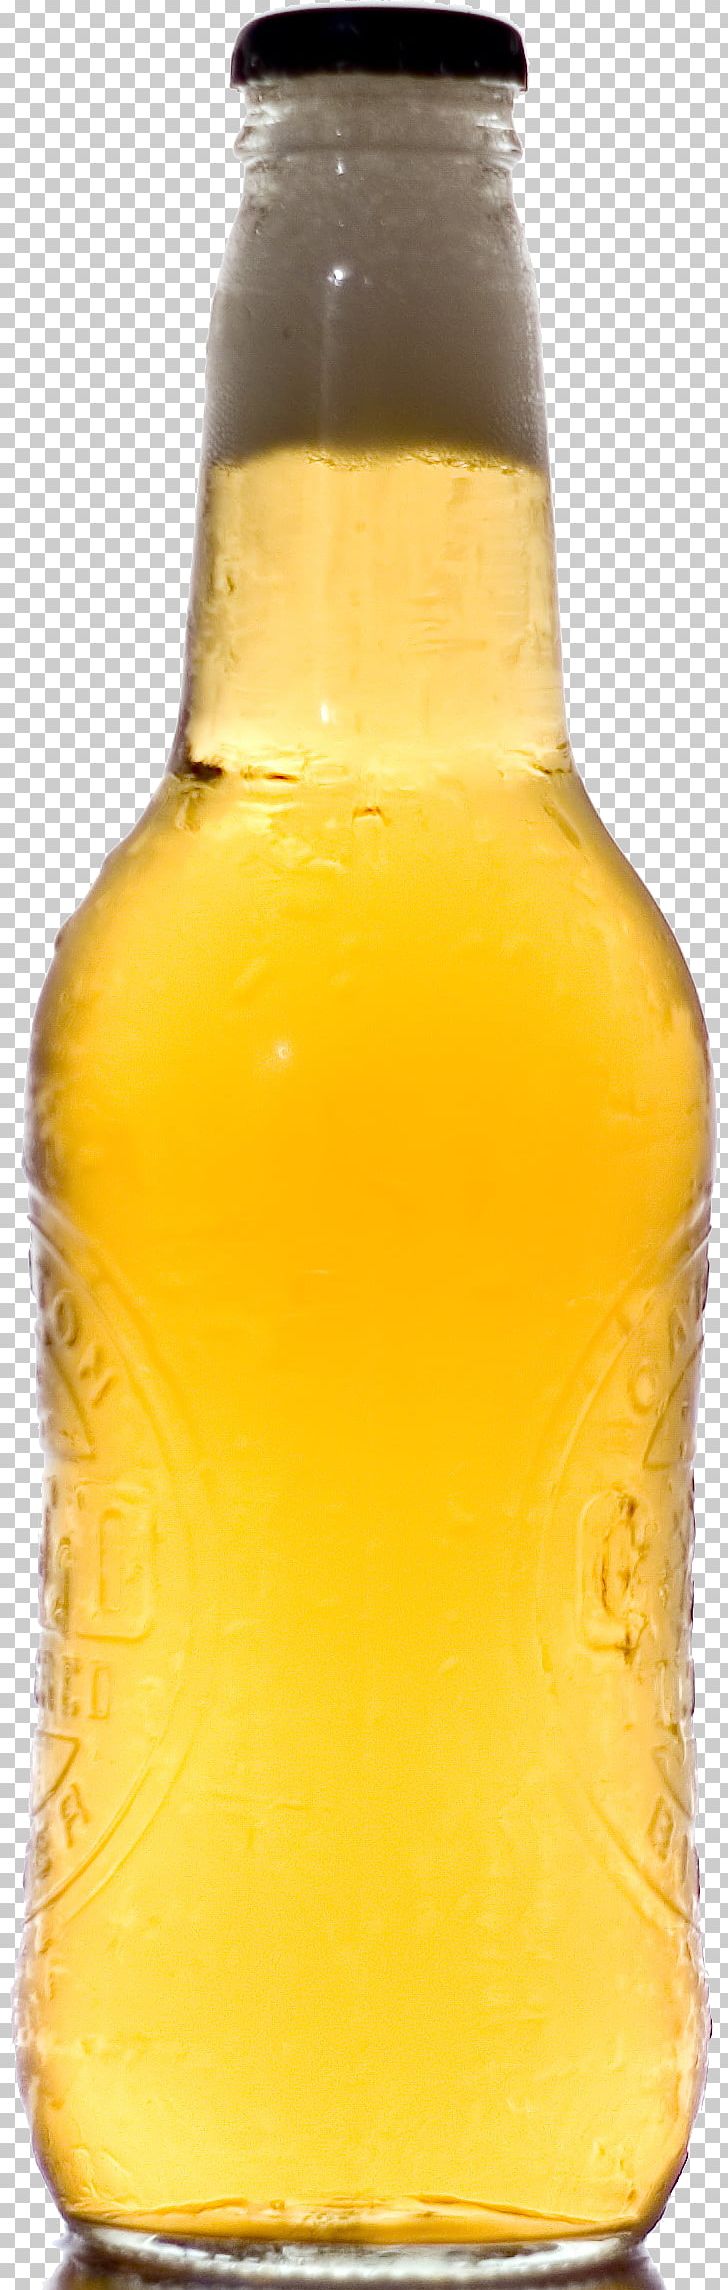 Beer Bottle Champagne Beck's Brewery PNG, Clipart, Asahi Breweries, Beer, Beer Bottle, Beer Glass, Beer Glasses Free PNG Download